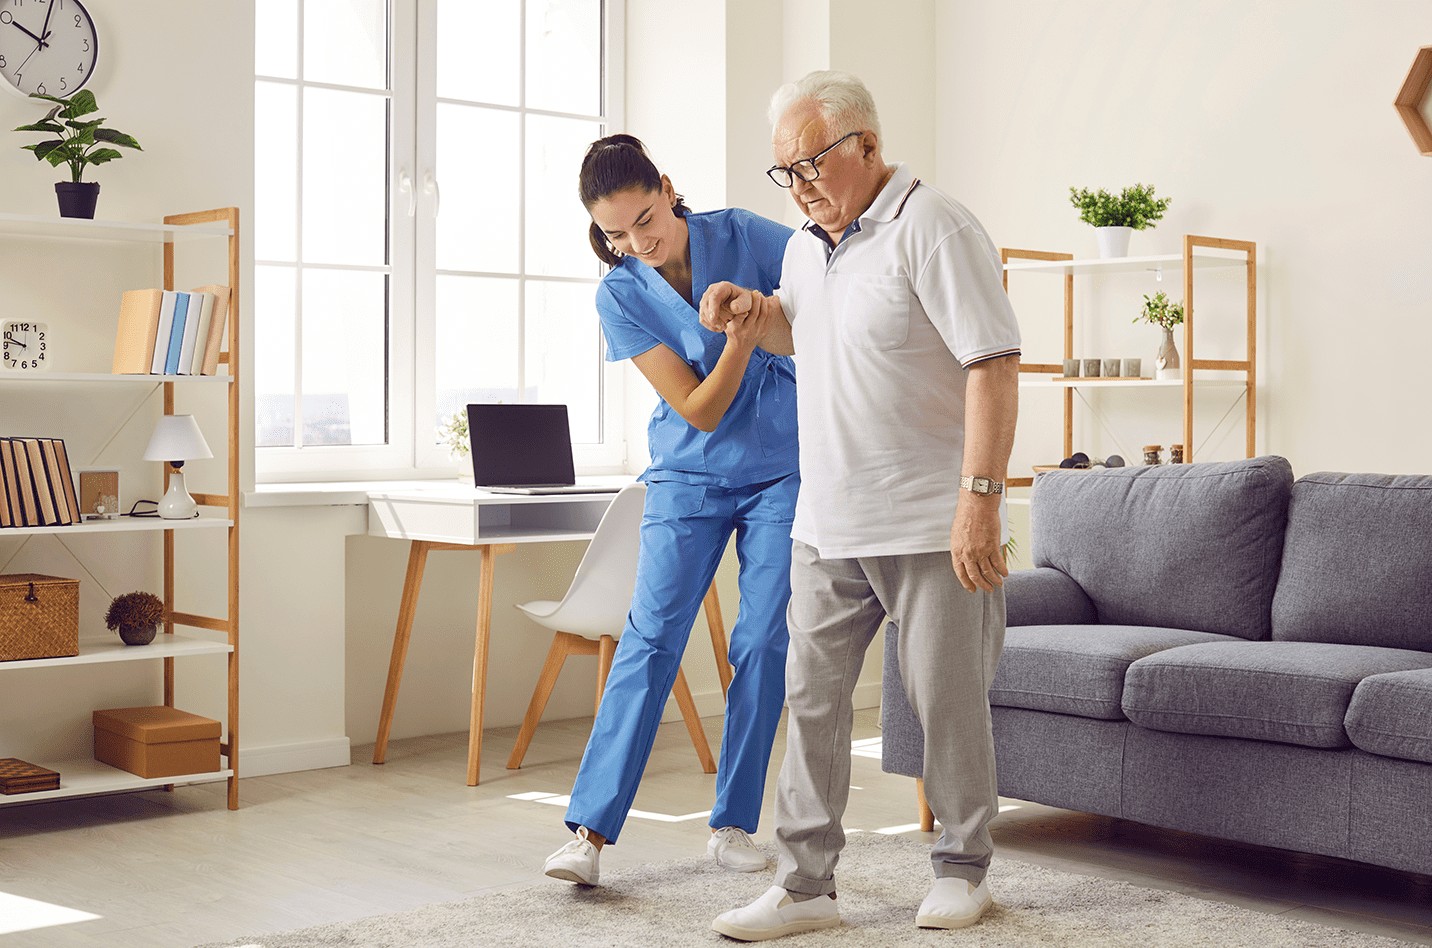 Young nurse helping elderly man walk in the room, holding his hand, supporting him. Home Health physical therapy treatment and rehabilitation after injury or stroke.